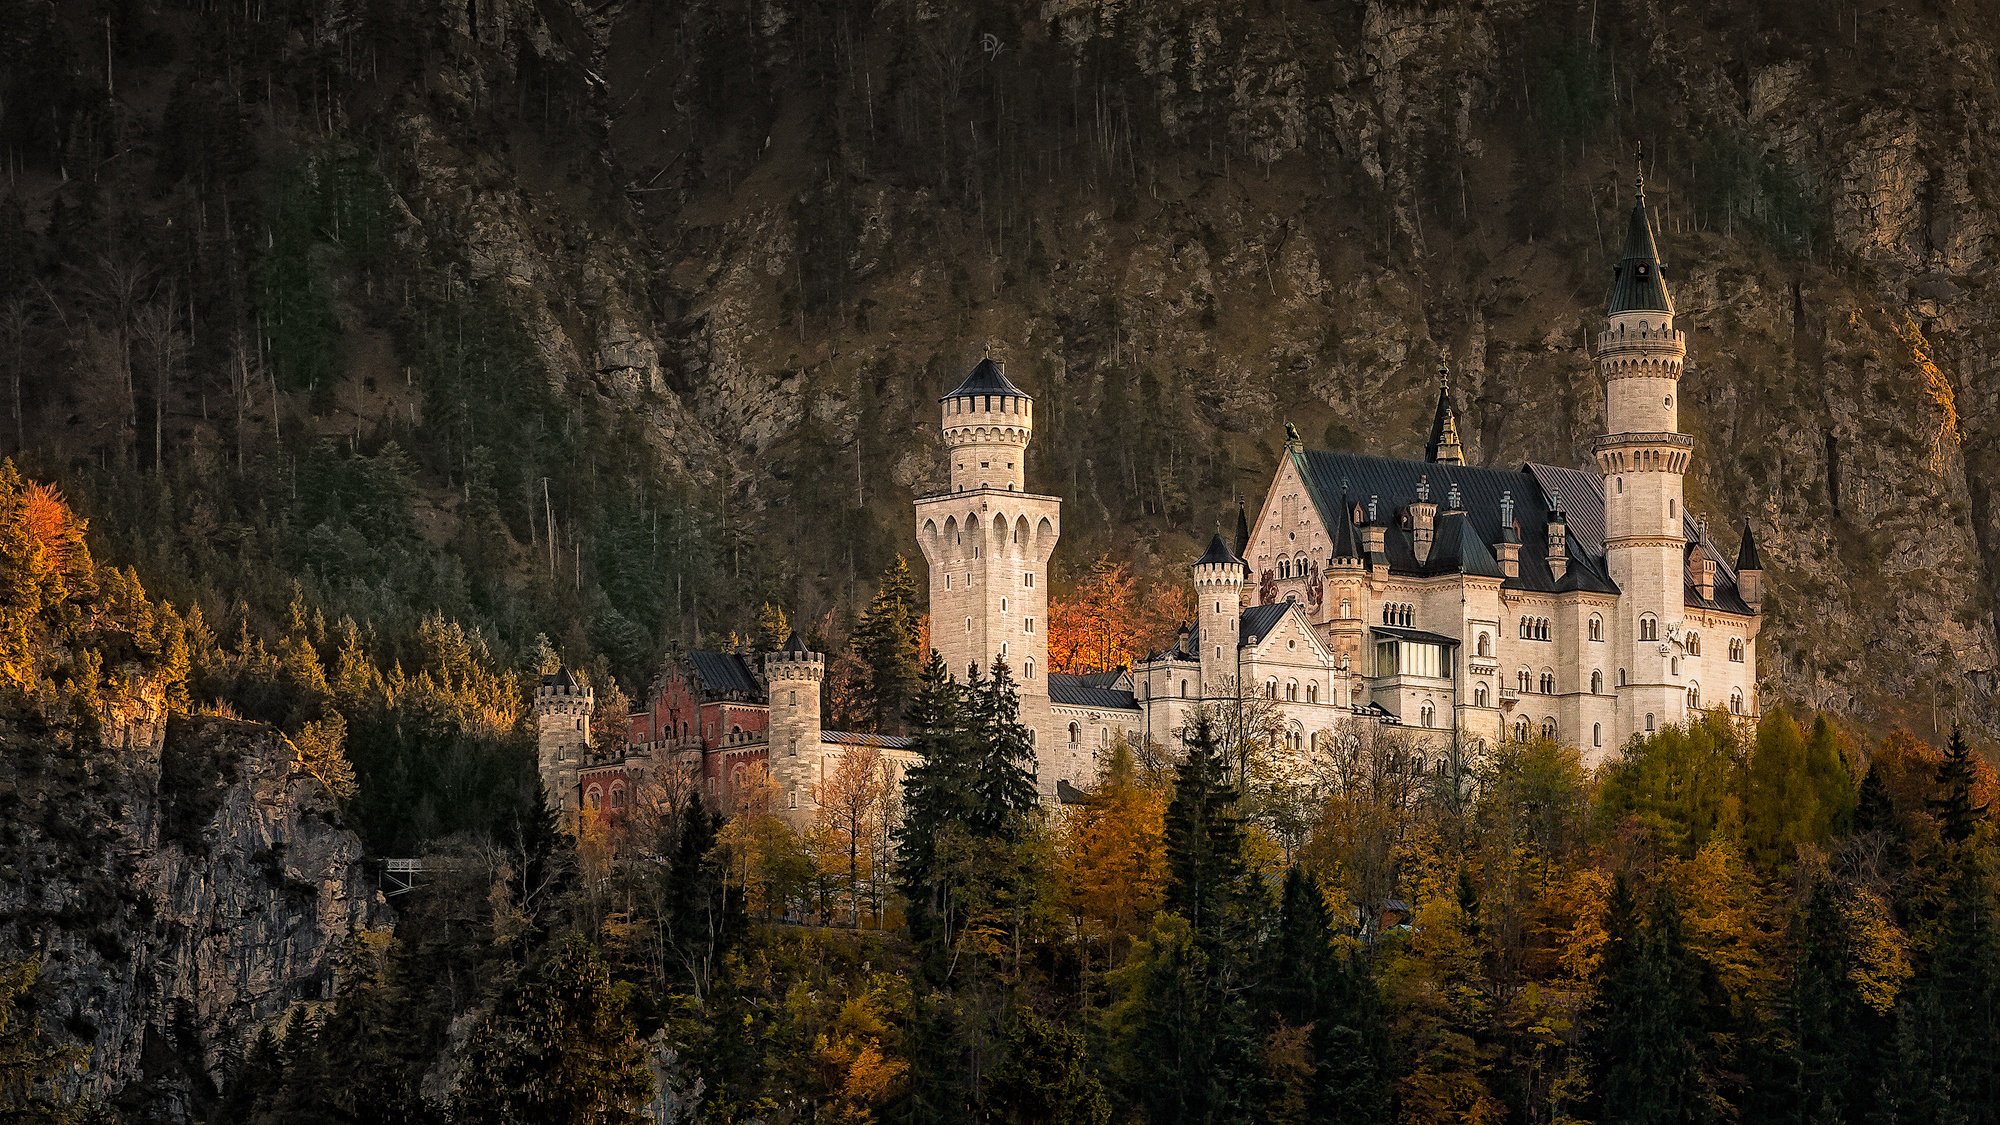 Neuschwanstein Castle On The Background Of Autumn Forest And Mountains